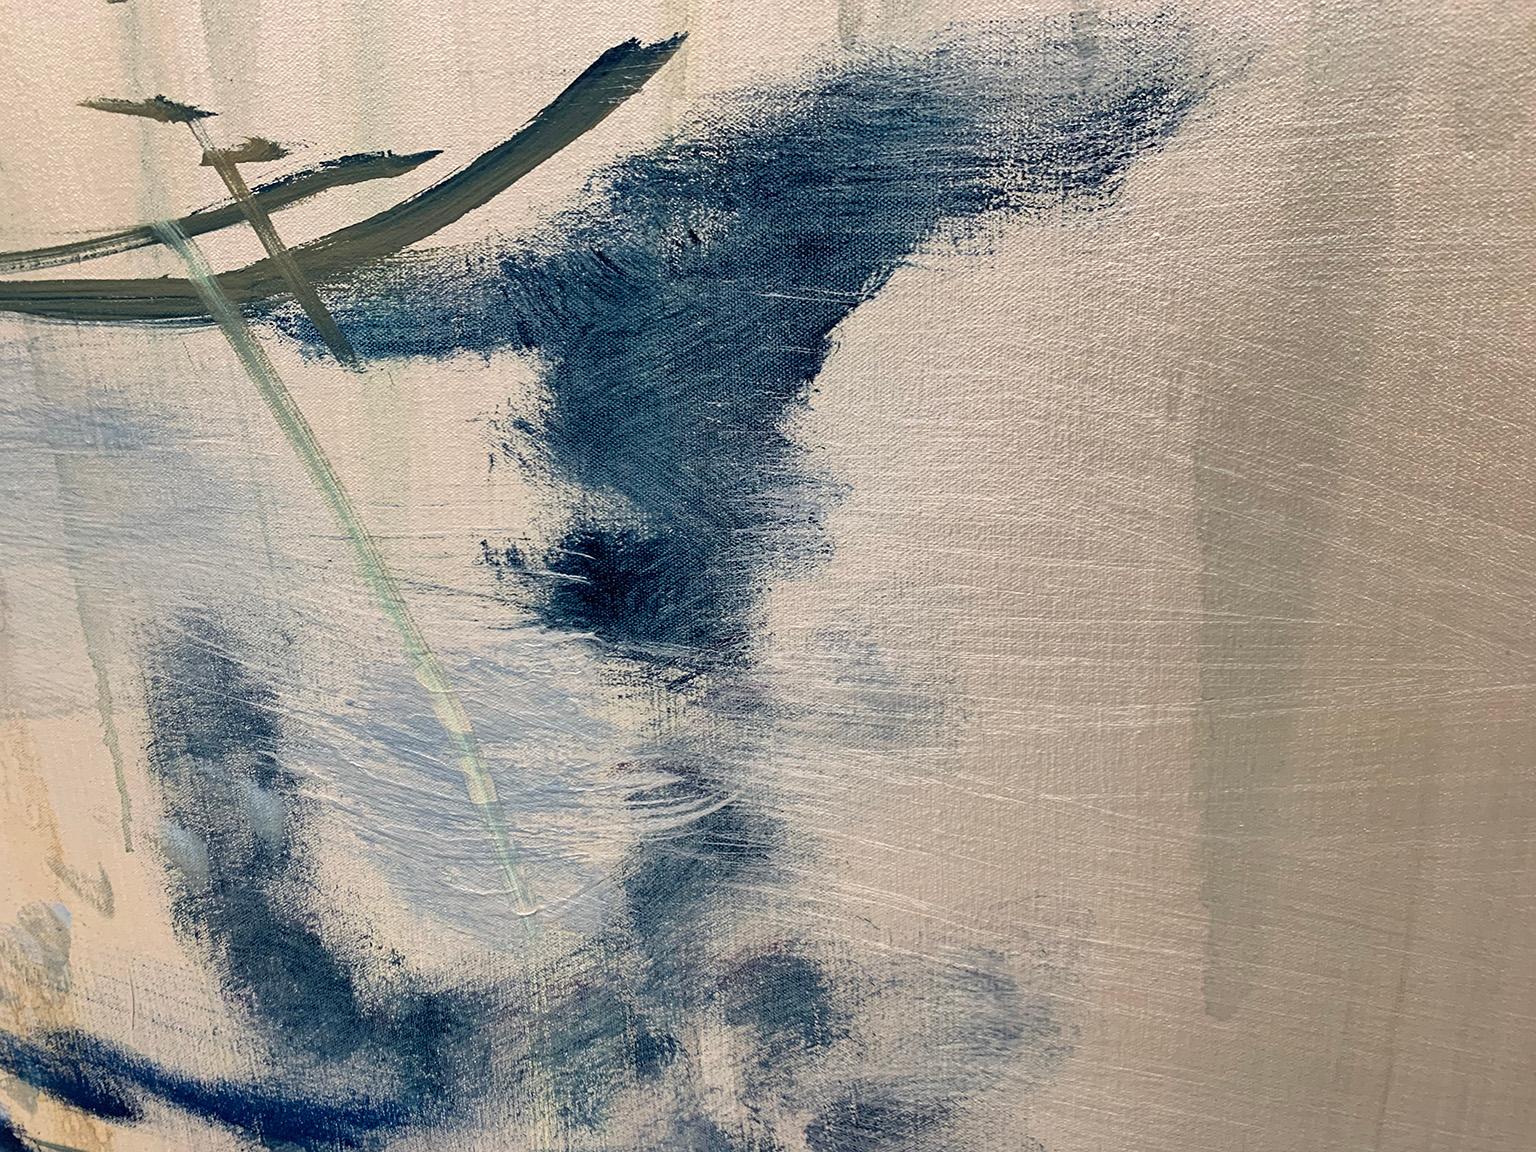 Antonio Ugarte paints water as a reflection of the spirit, a form of meditation. He sees water as “a primordial element” in life and the physical environment as a source of both energy and serenity. He uses water as a resource to explore the